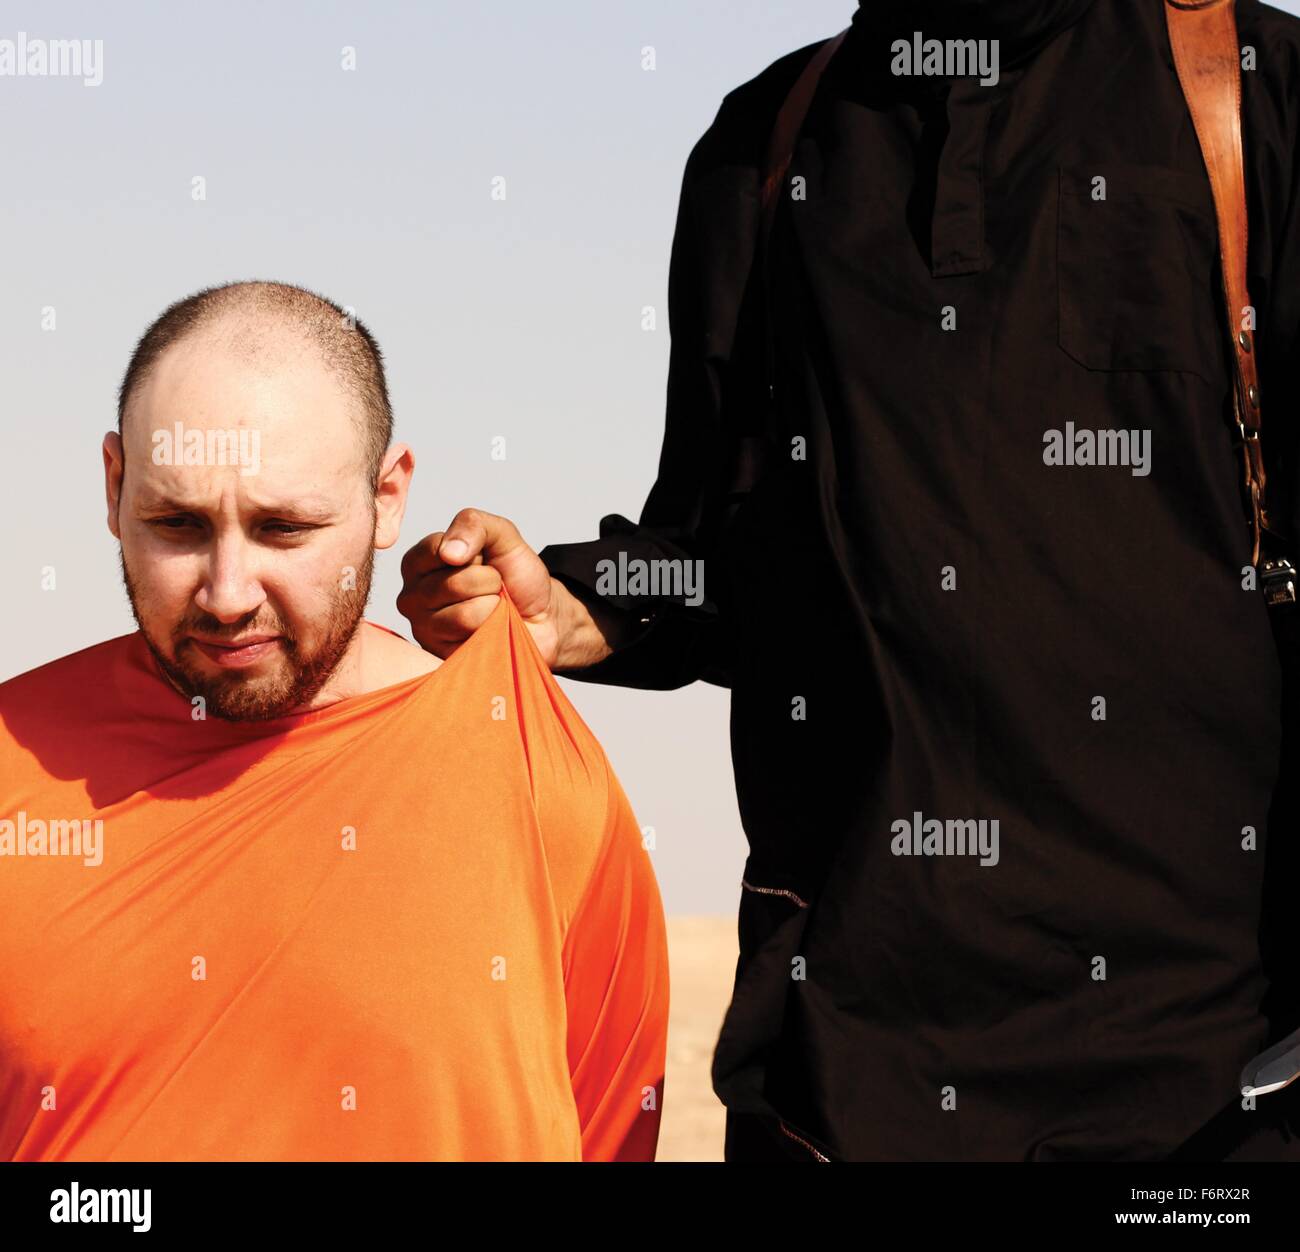 Islamic State of Iraq and the Levant propaganda photo showing the execution of American journalist Steven Sotloff by masked ISIS militant Jihadi John in September 2014. Stock Photo